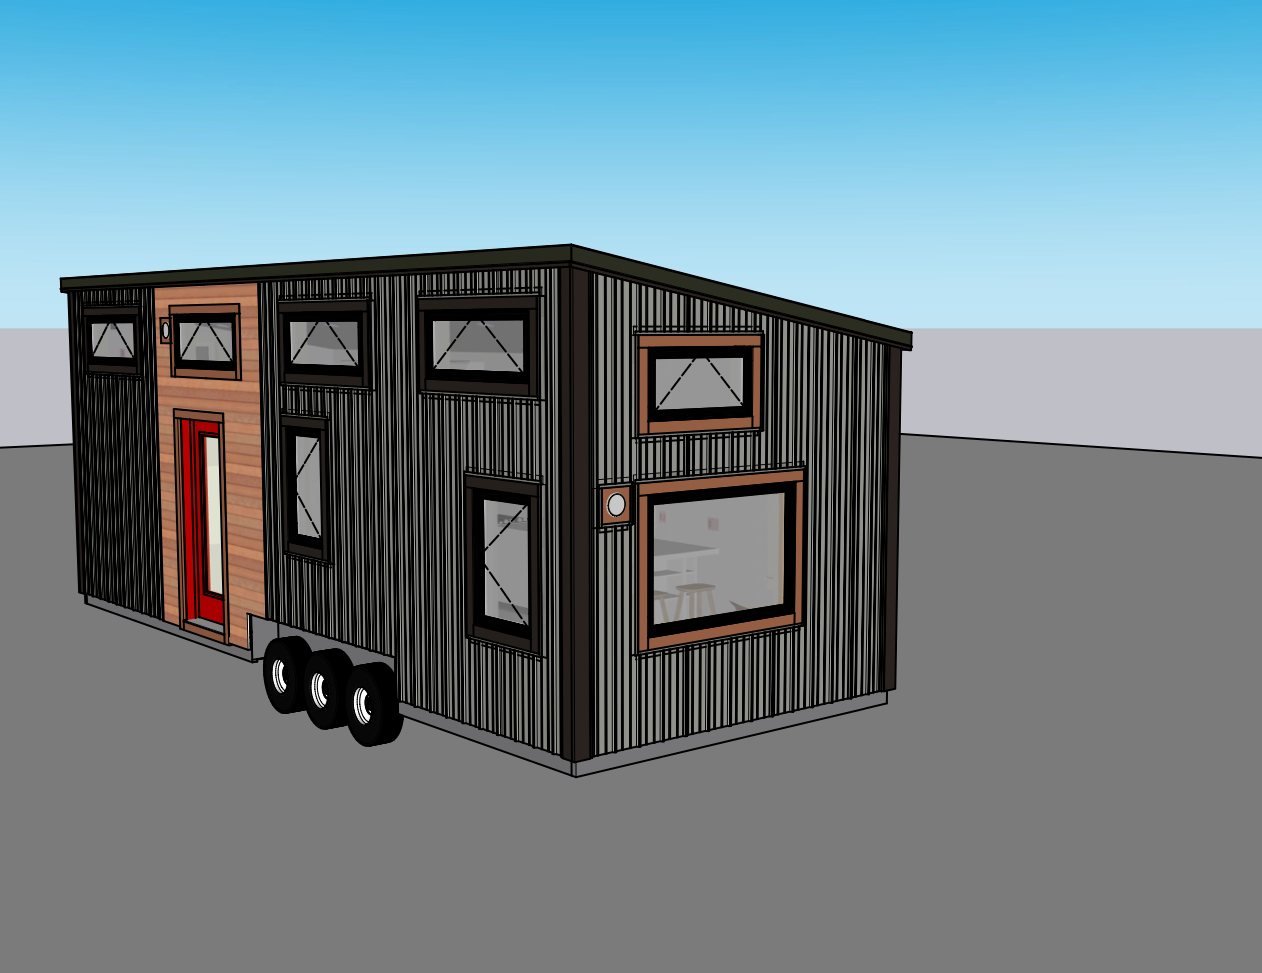 Did you know that every student in our tiny house course series receives a full set of NOAH-certified plans? @NOAH RDI (National Organization of Alternative Housing) is an ANSI accredited inspection body that has created tiny-house specific building 